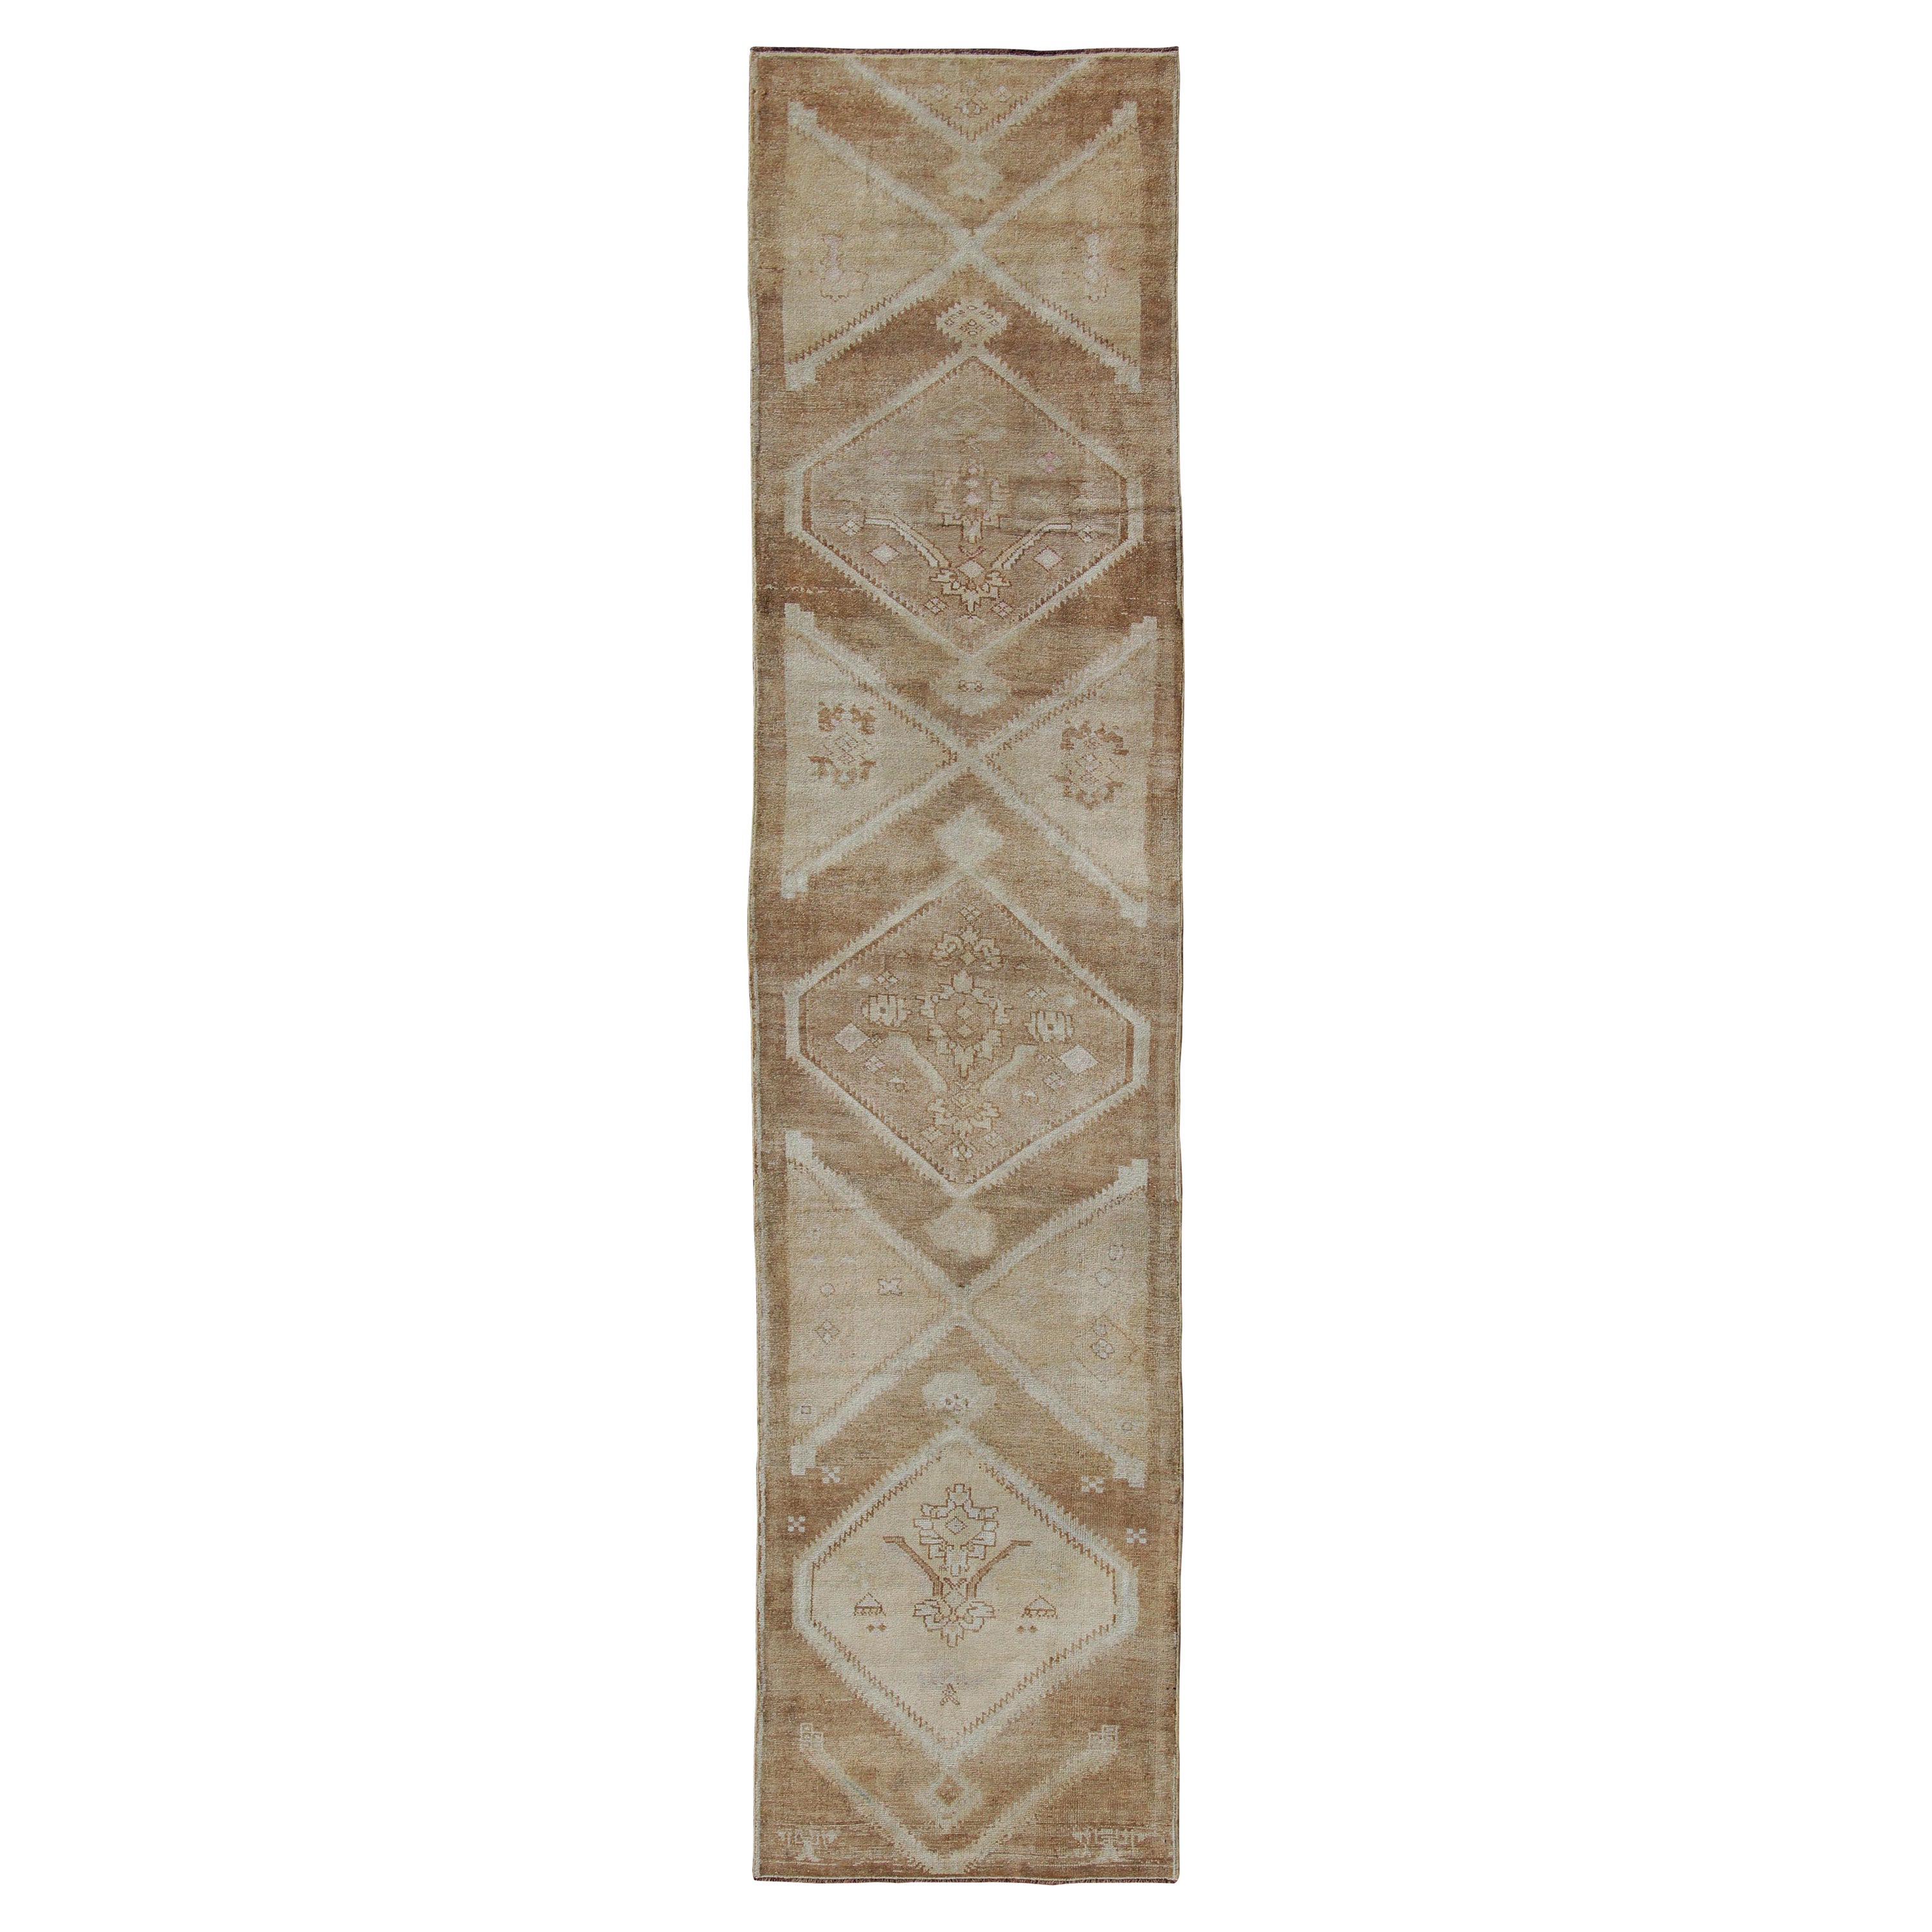 Vintage Turkish Oushak Runner Neutral and Warm Colors with Tribal Medallions